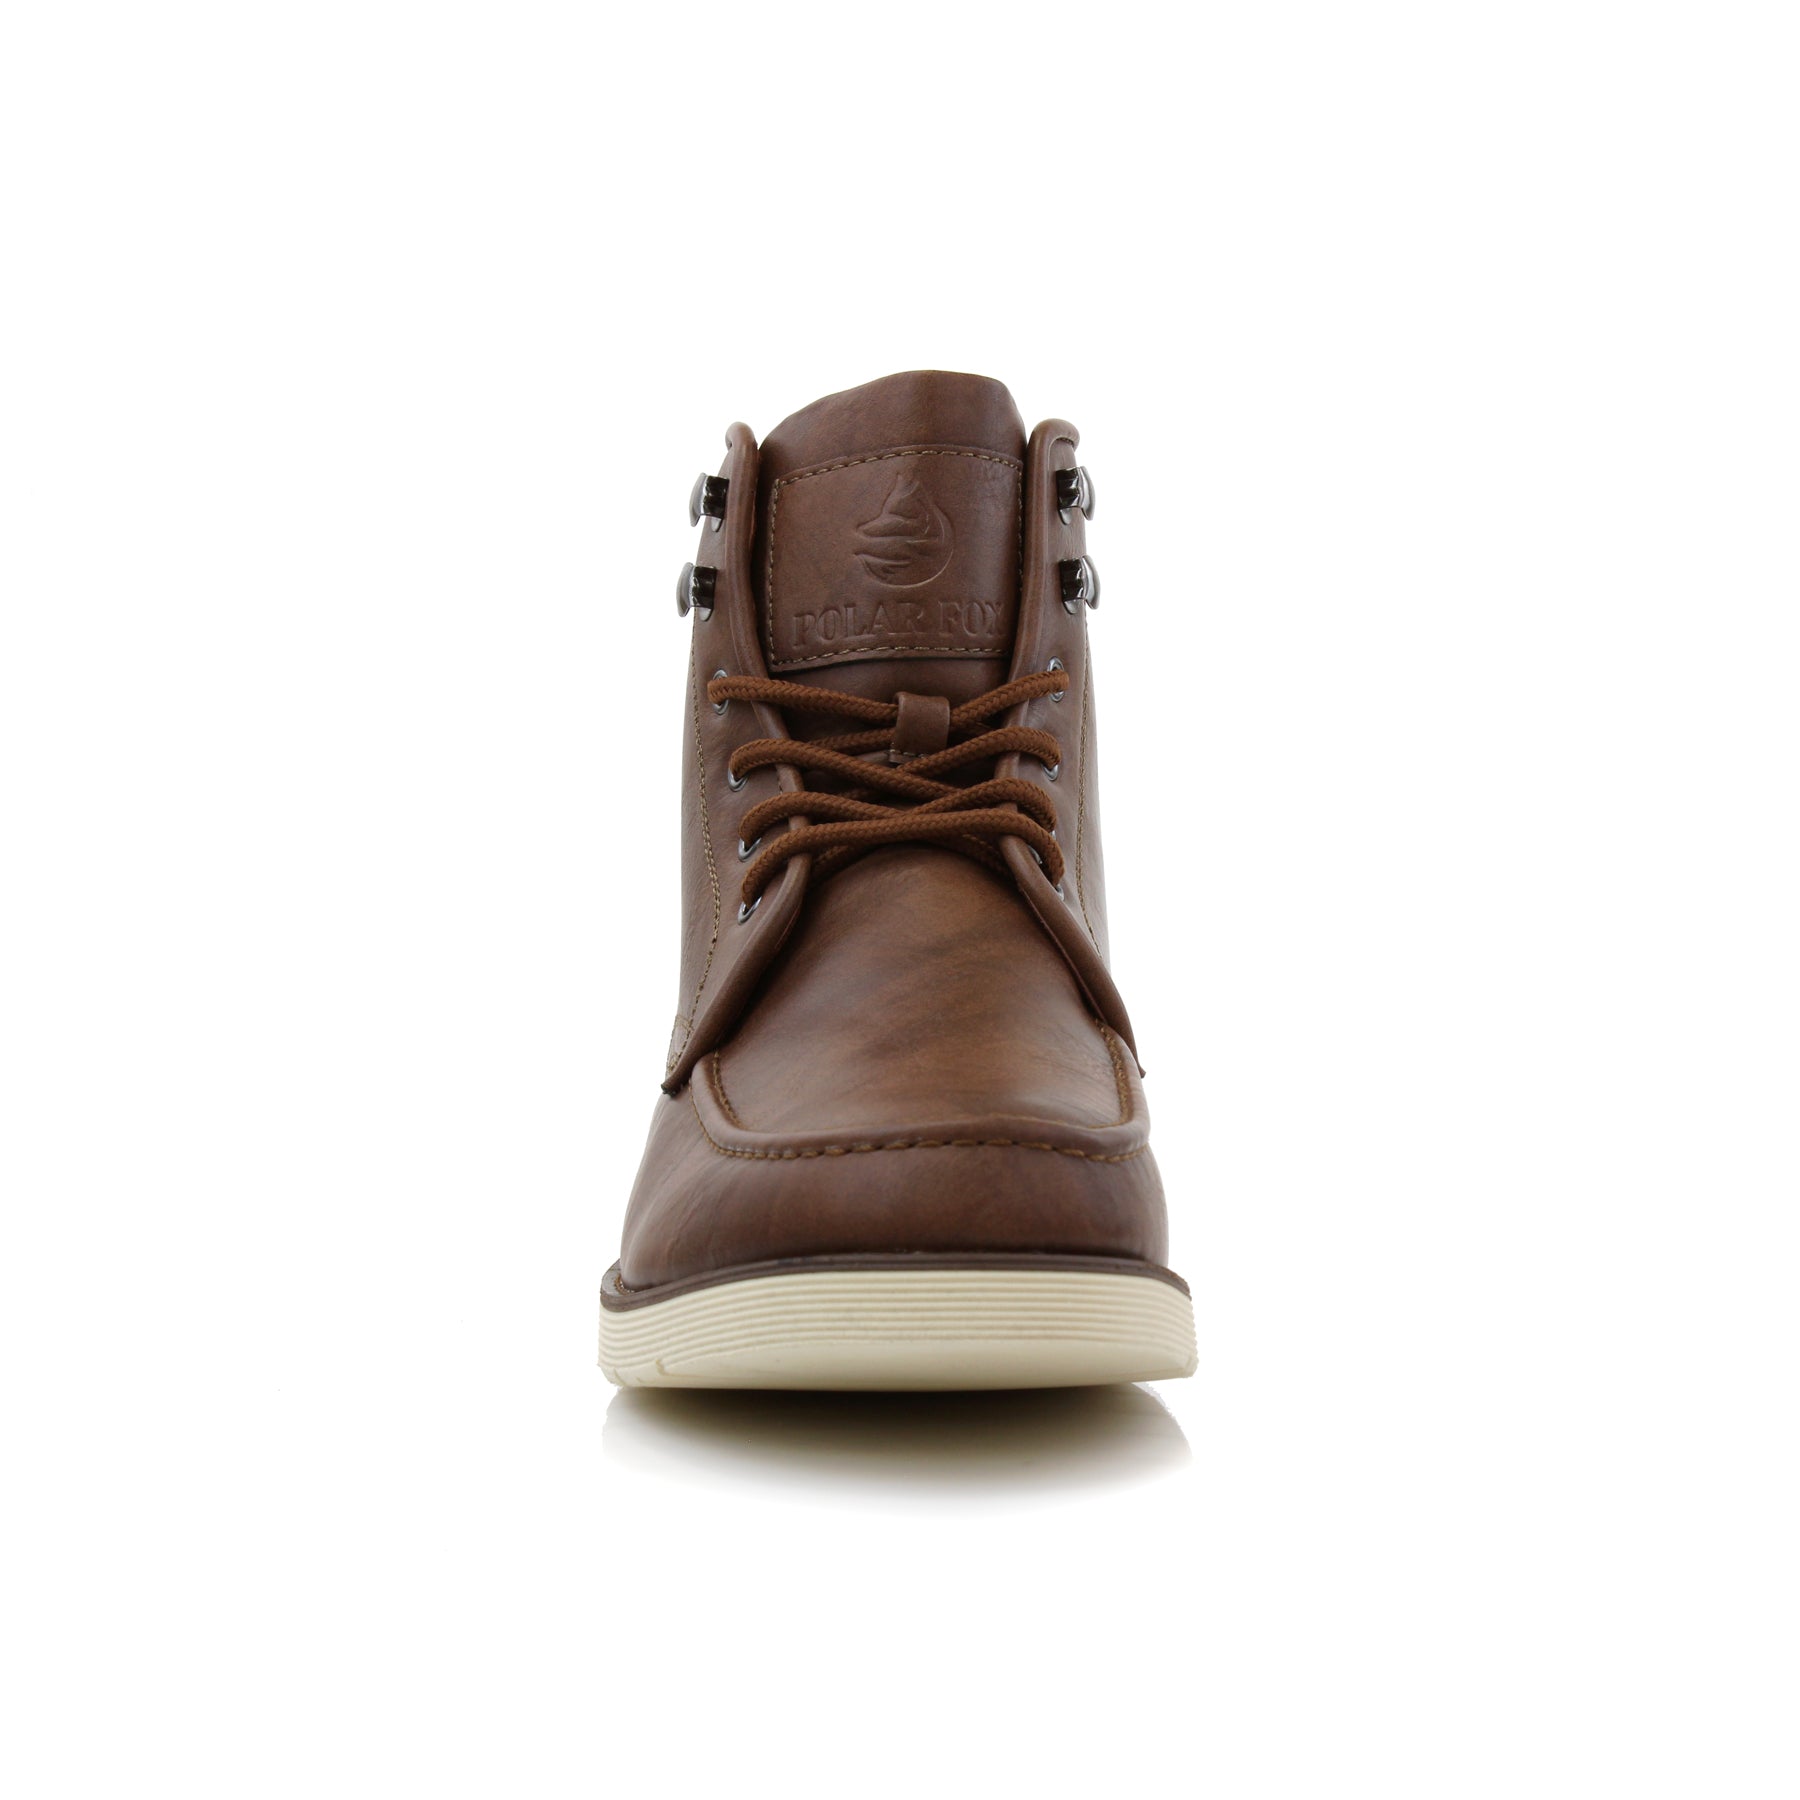 Moc-Toe High-Top Boots | Brixton by Polar Fox | Conal Footwear | Front Angle View